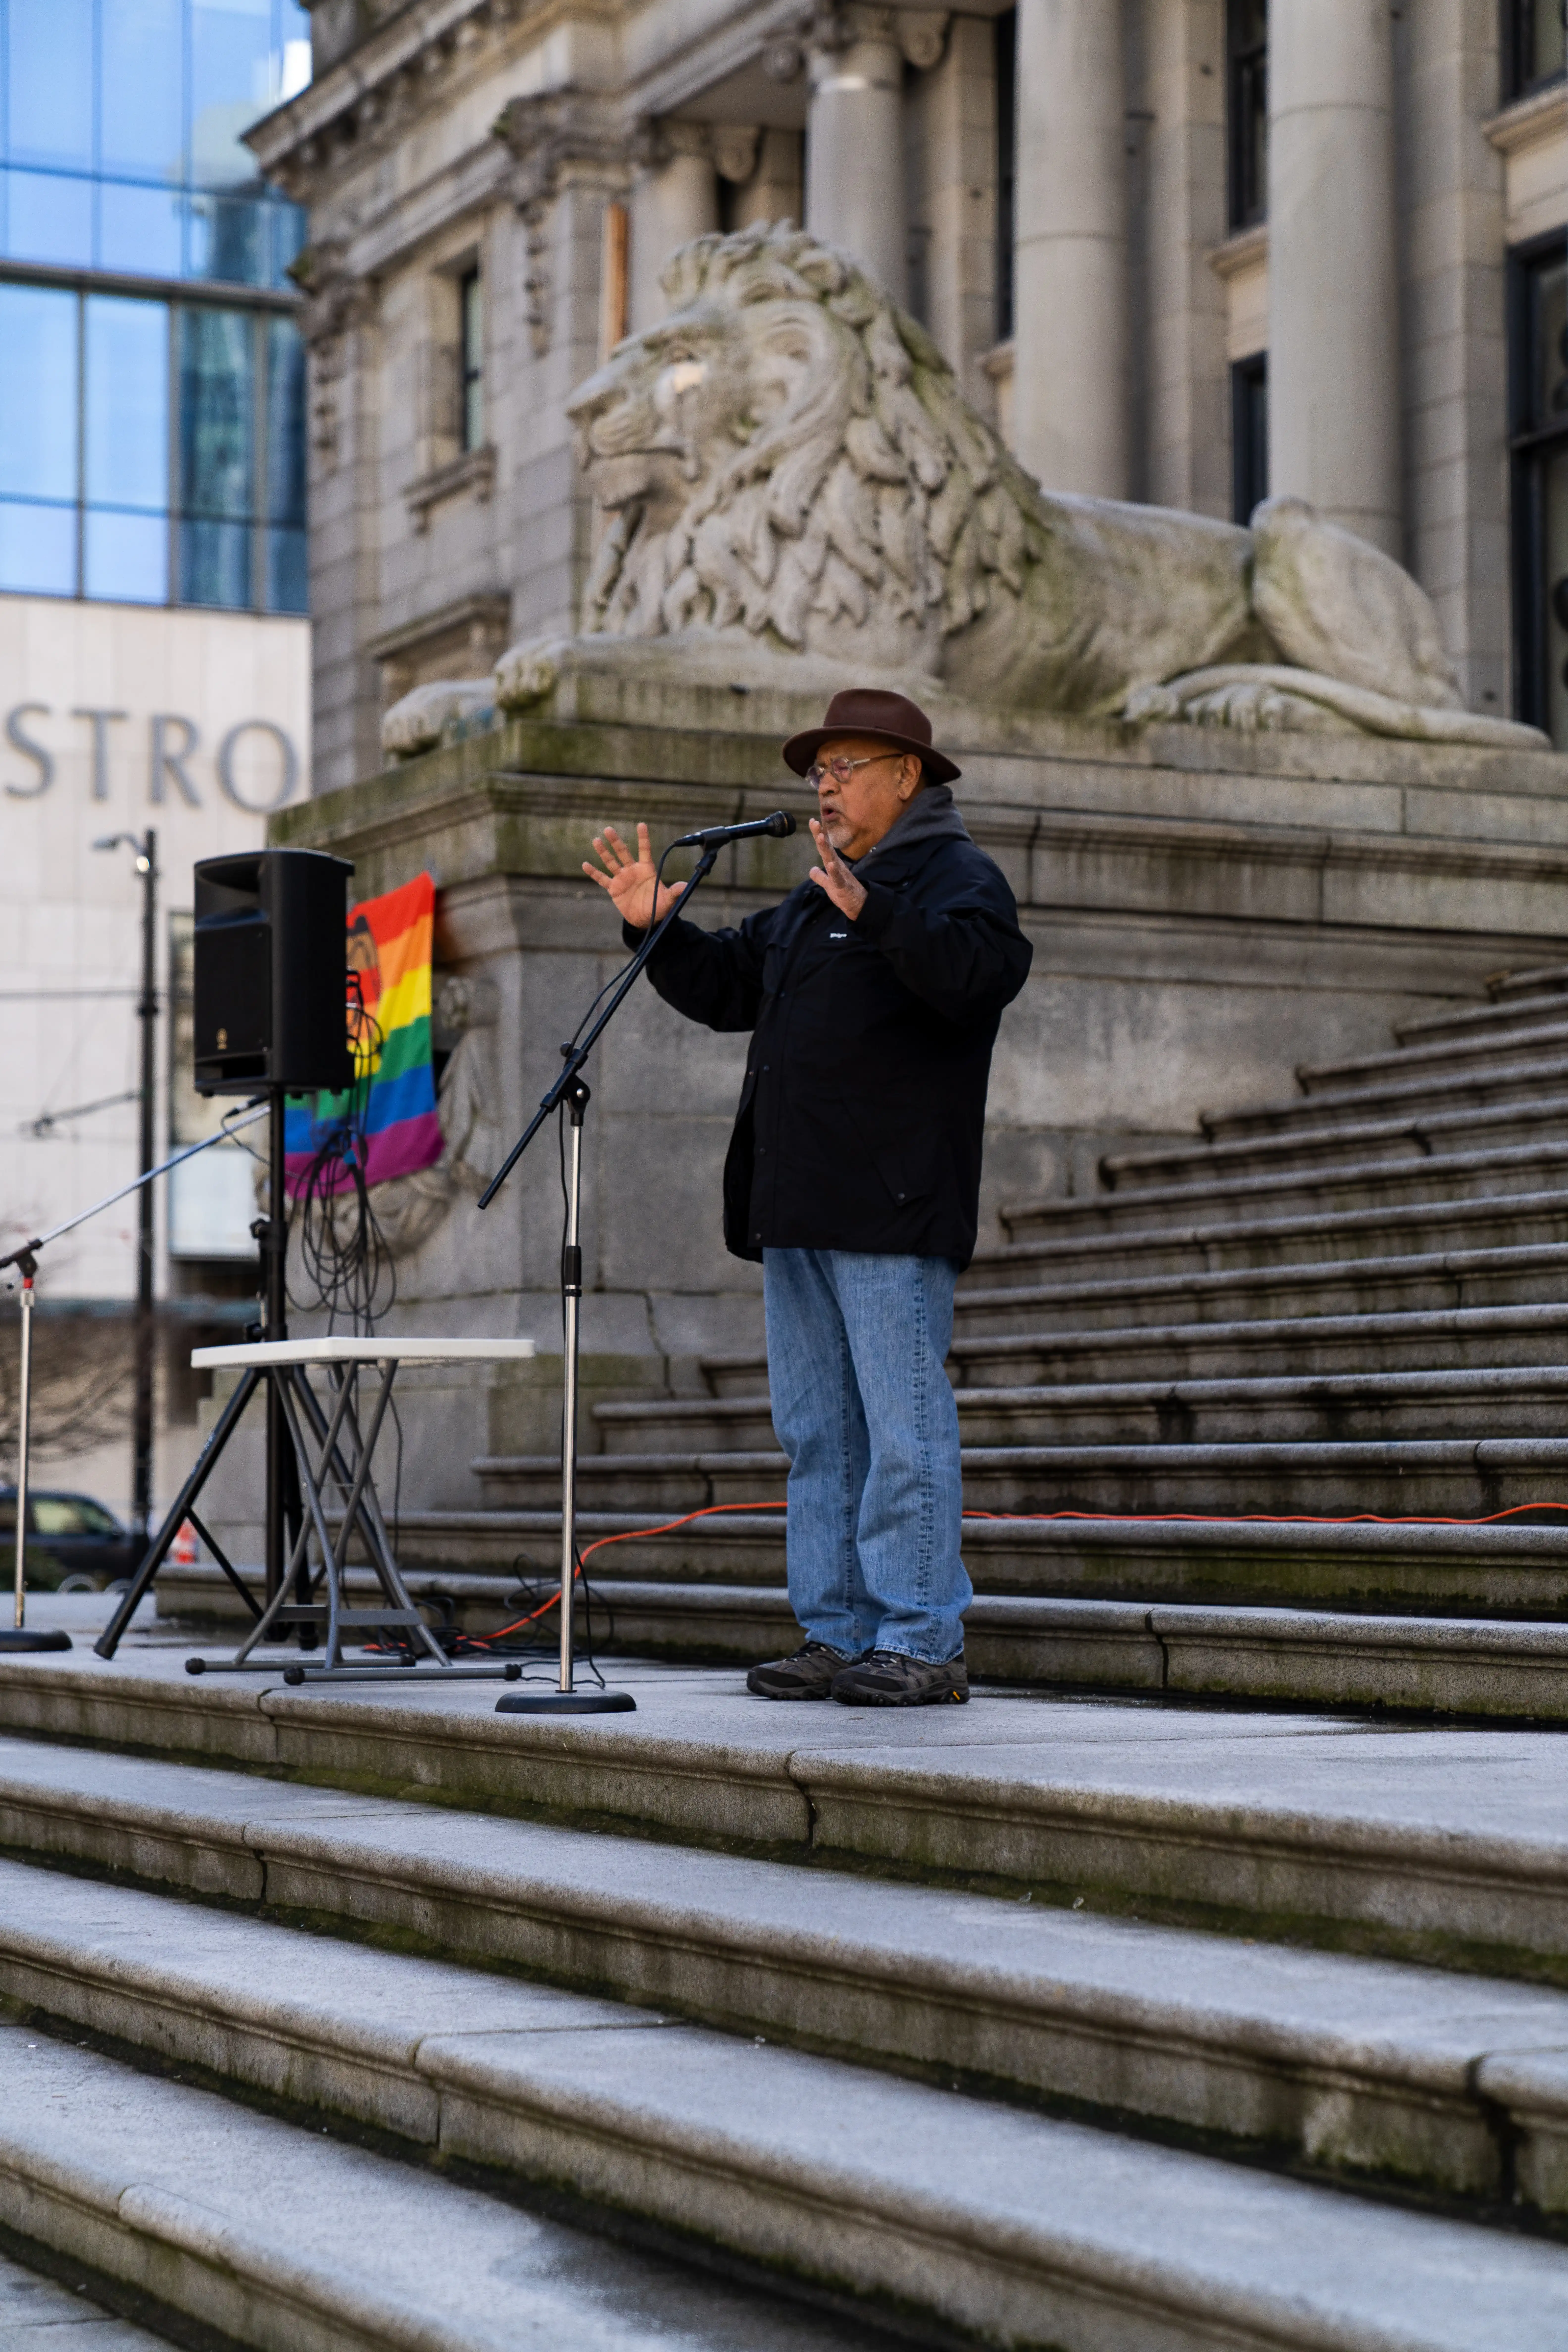 This is an image of Elder Shane, speaking to the crowd. He is speaking into a microphone on large stone stairs outside.